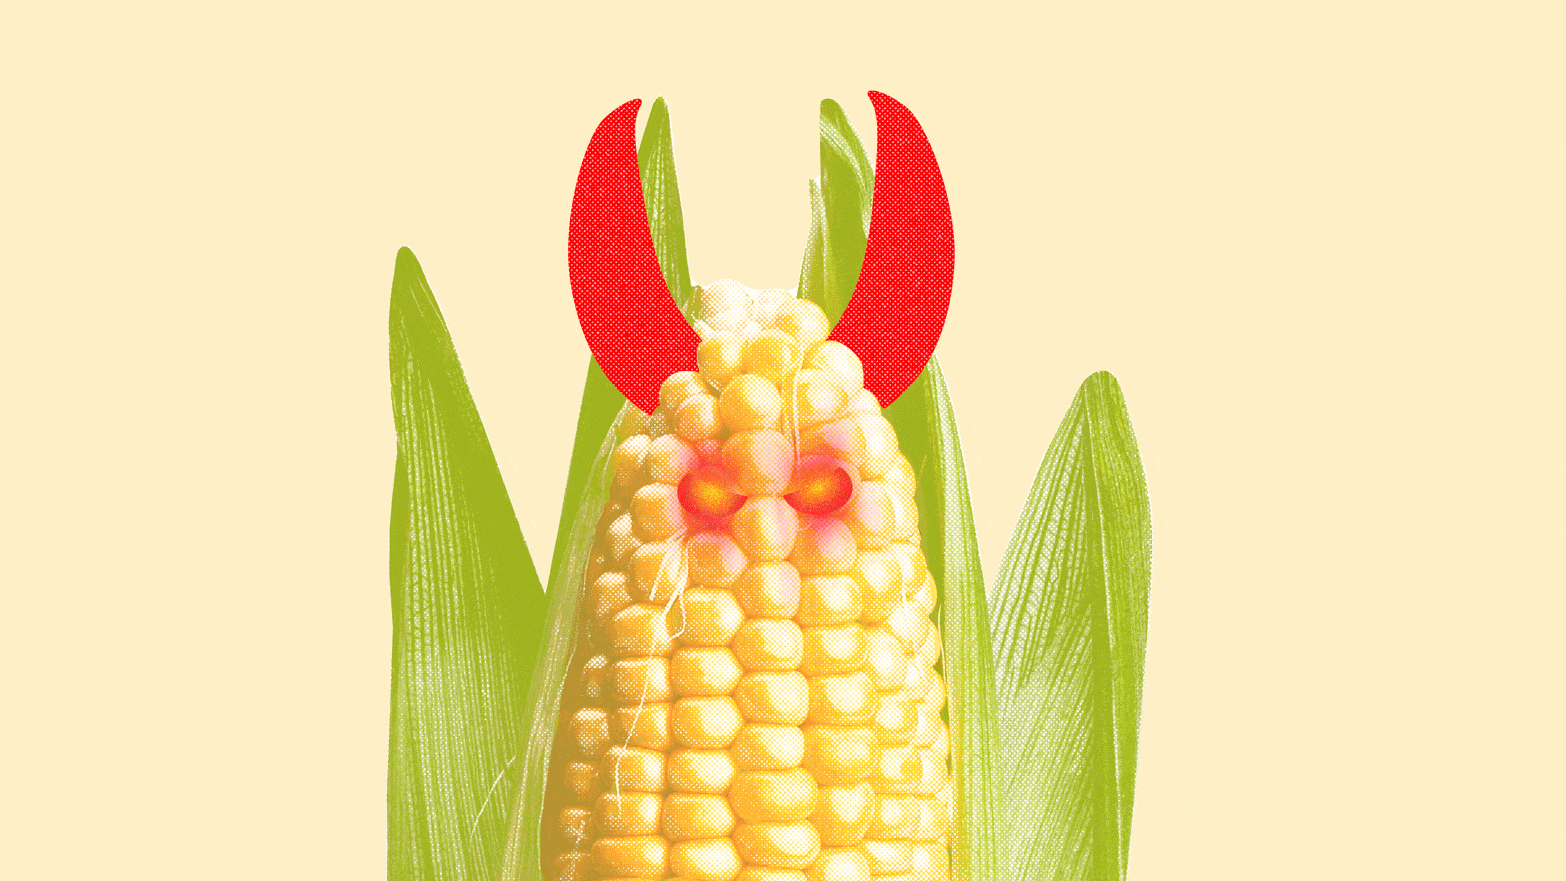 A photo illustration gif showing an ear of corn with devil horns and glowing red eyes.